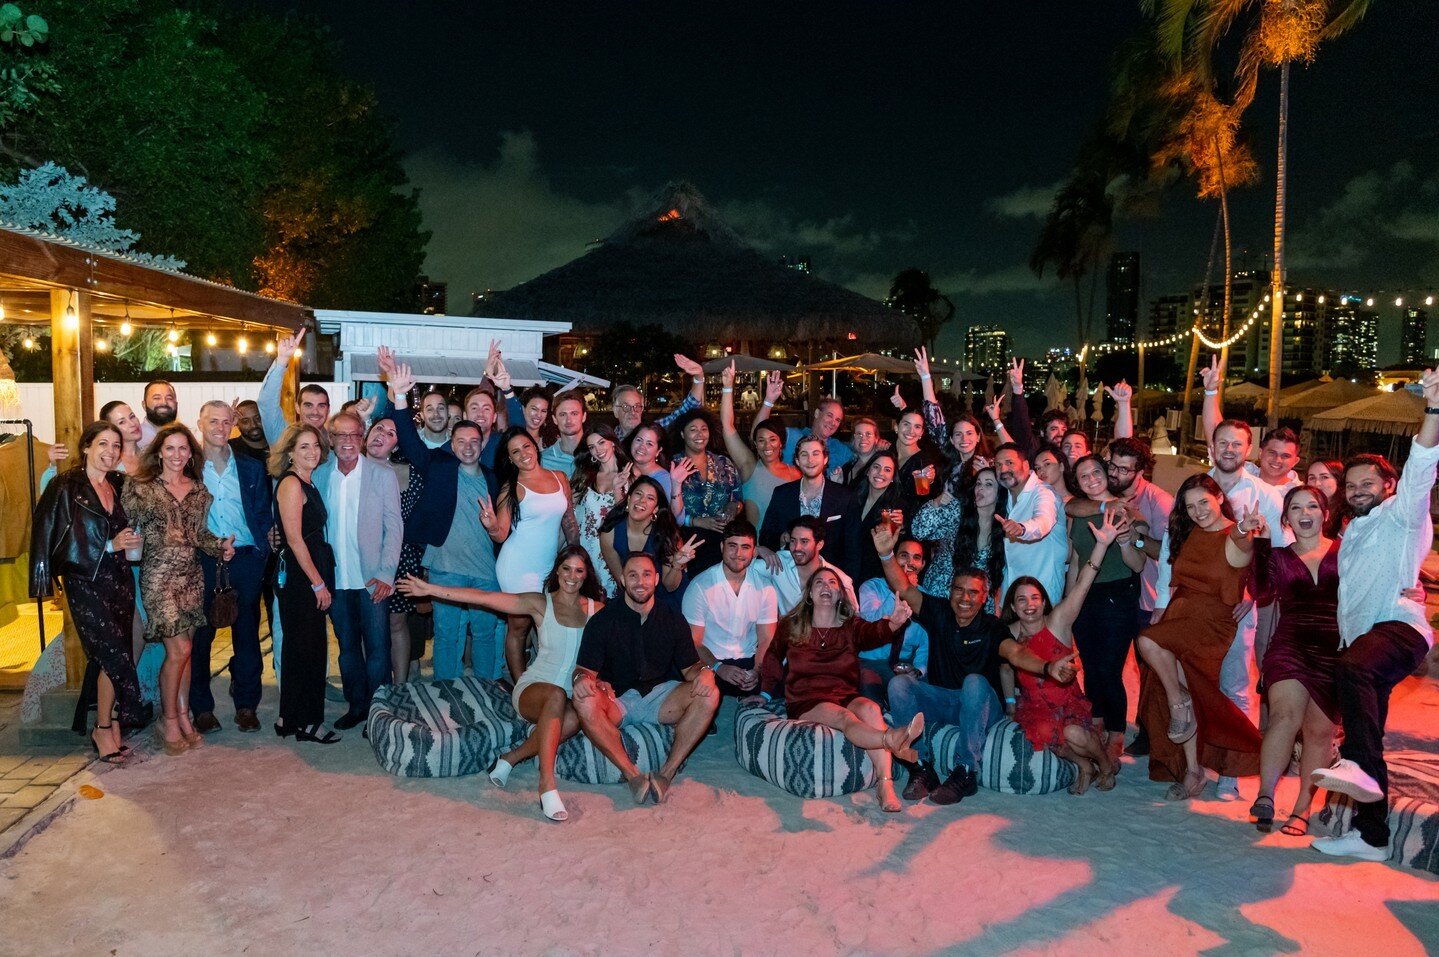 Happy Holidays from the Amicon team! We had a great time celebrating at one of our iconic projects, @joiabeach. We're wishing our clients, partners, loved ones and more a joyous season!